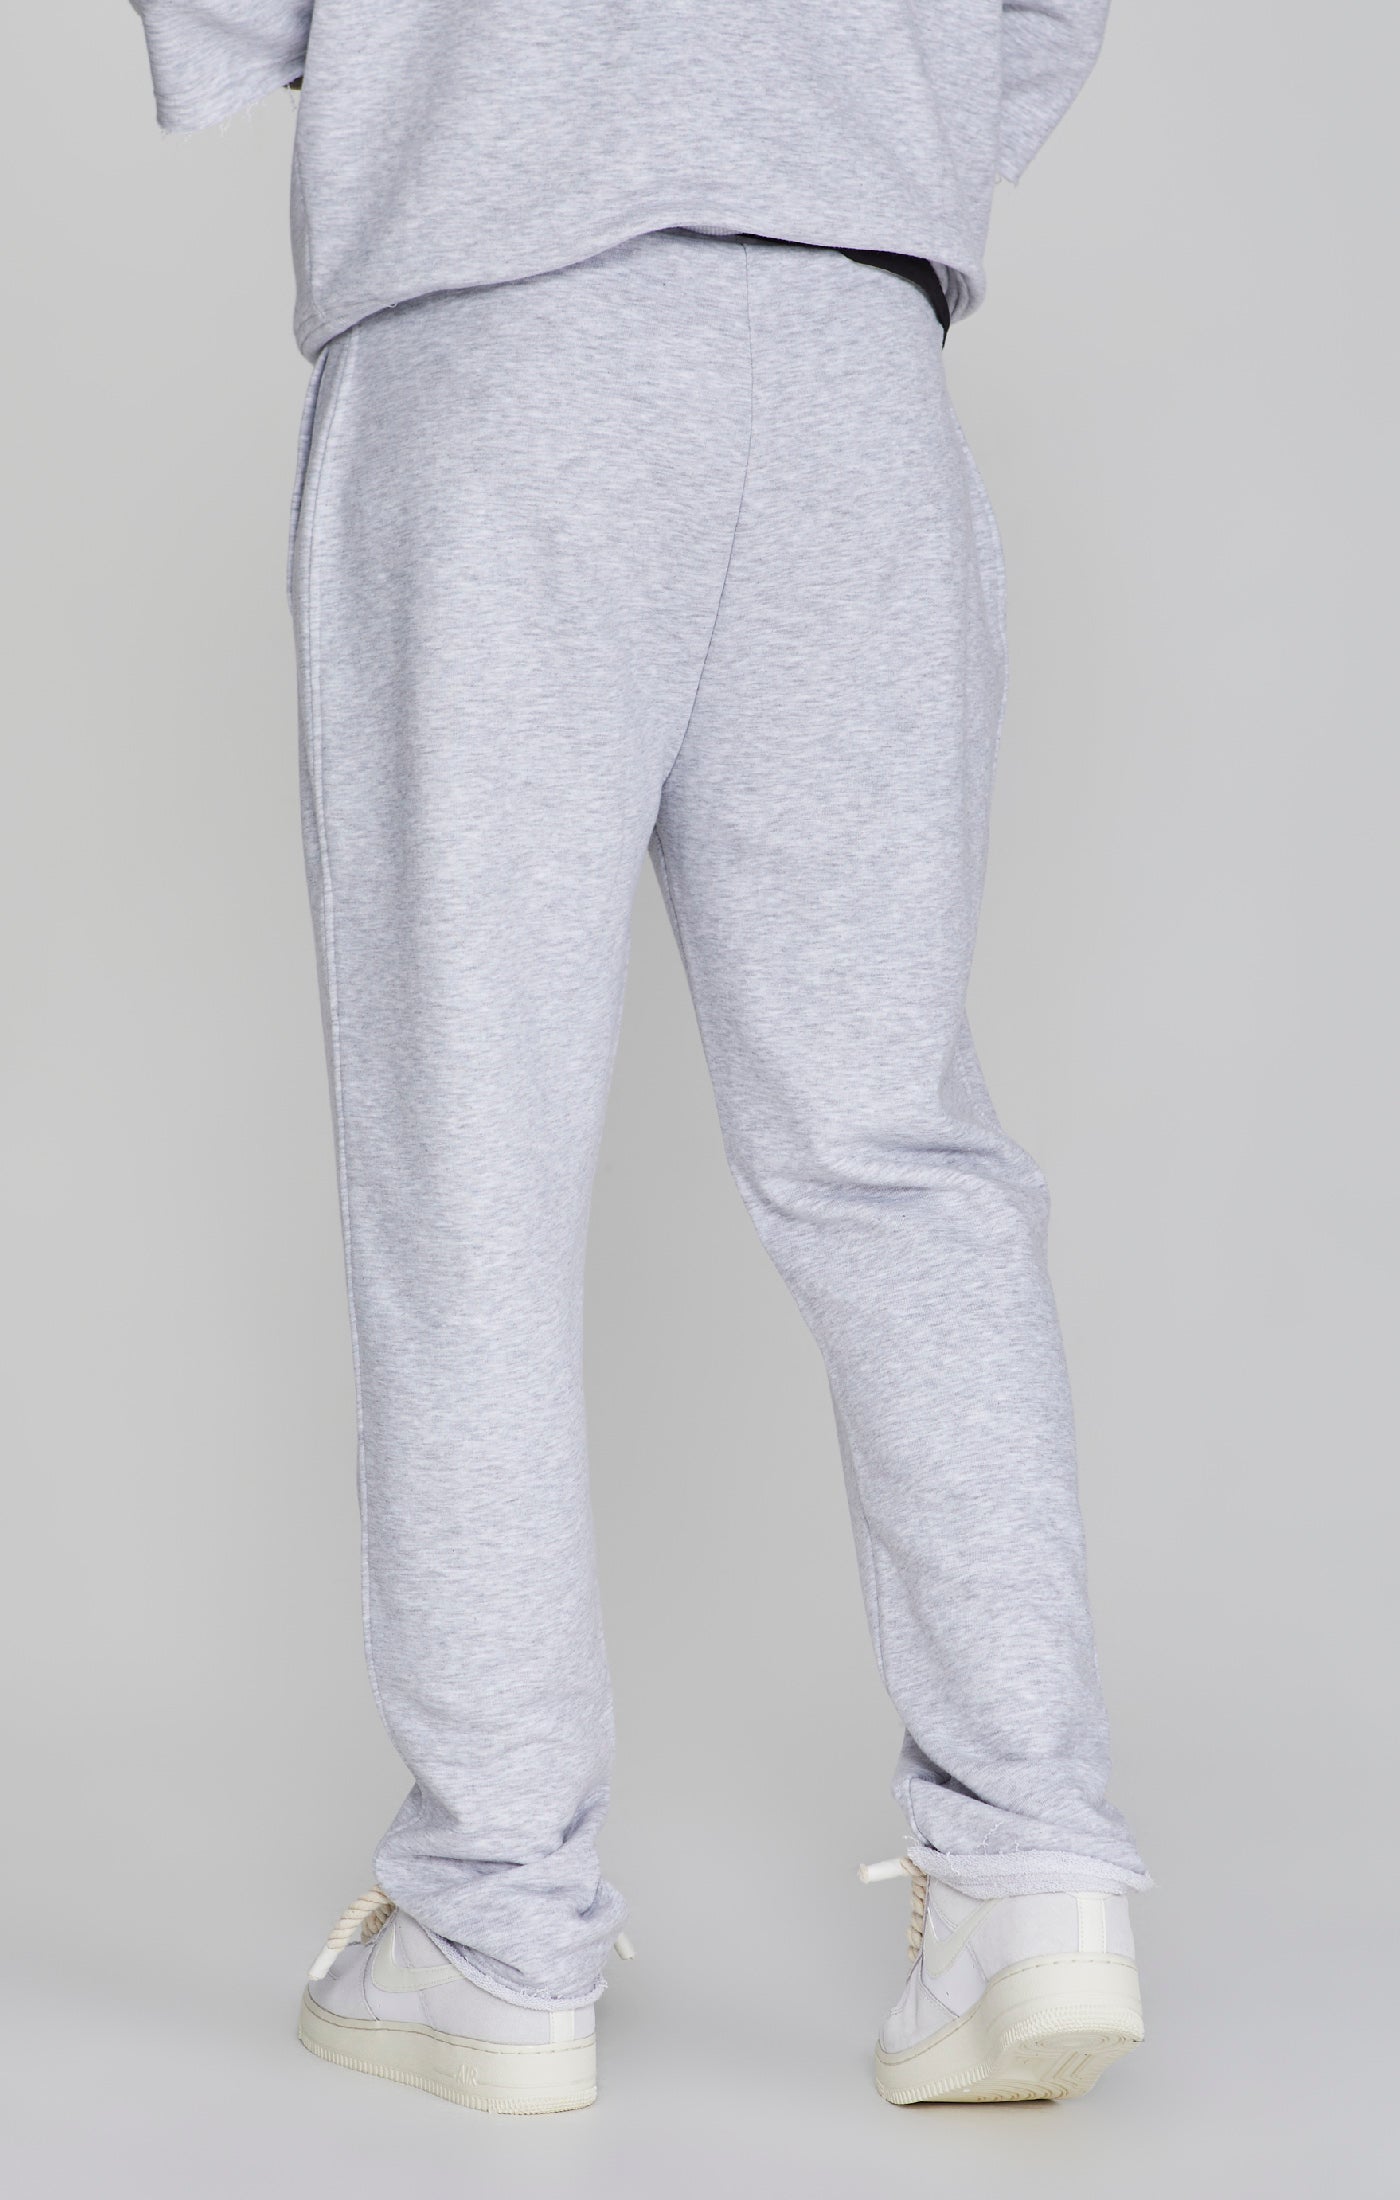 Siksilk - Relaxed Fit Joggers